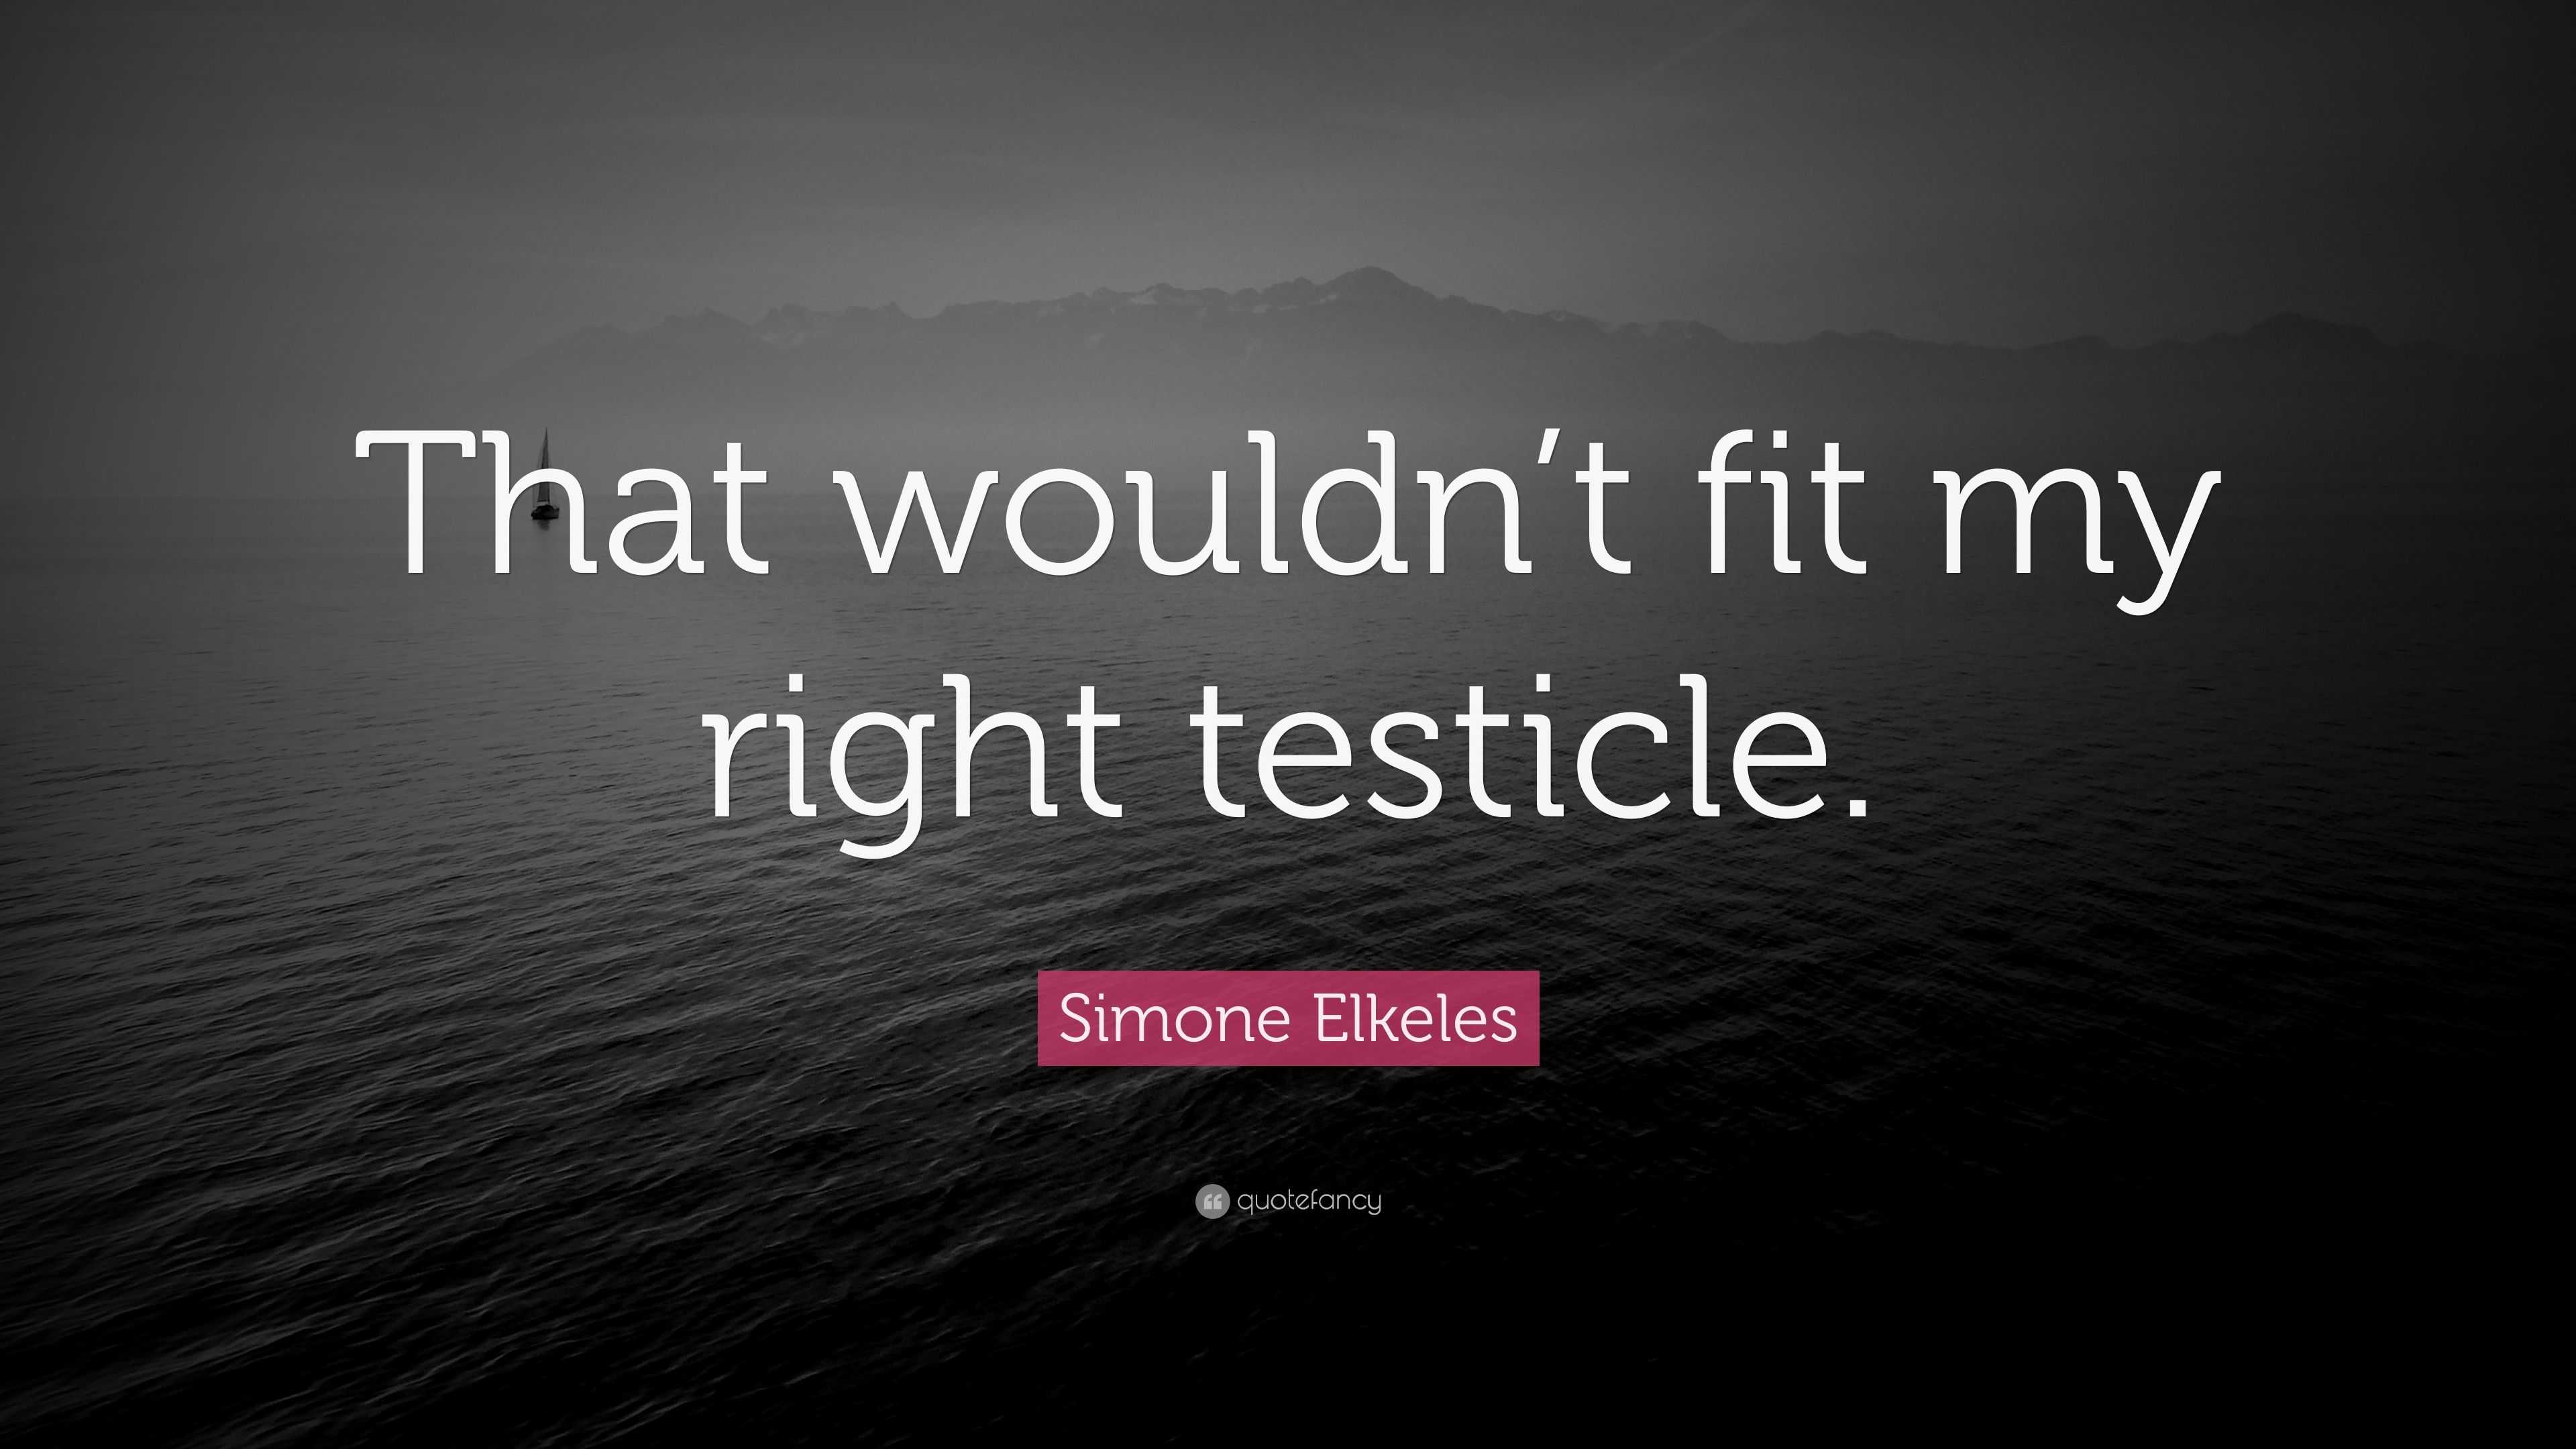 Simone Elkeles Quote “that Wouldnt Fit My Right Testicle”